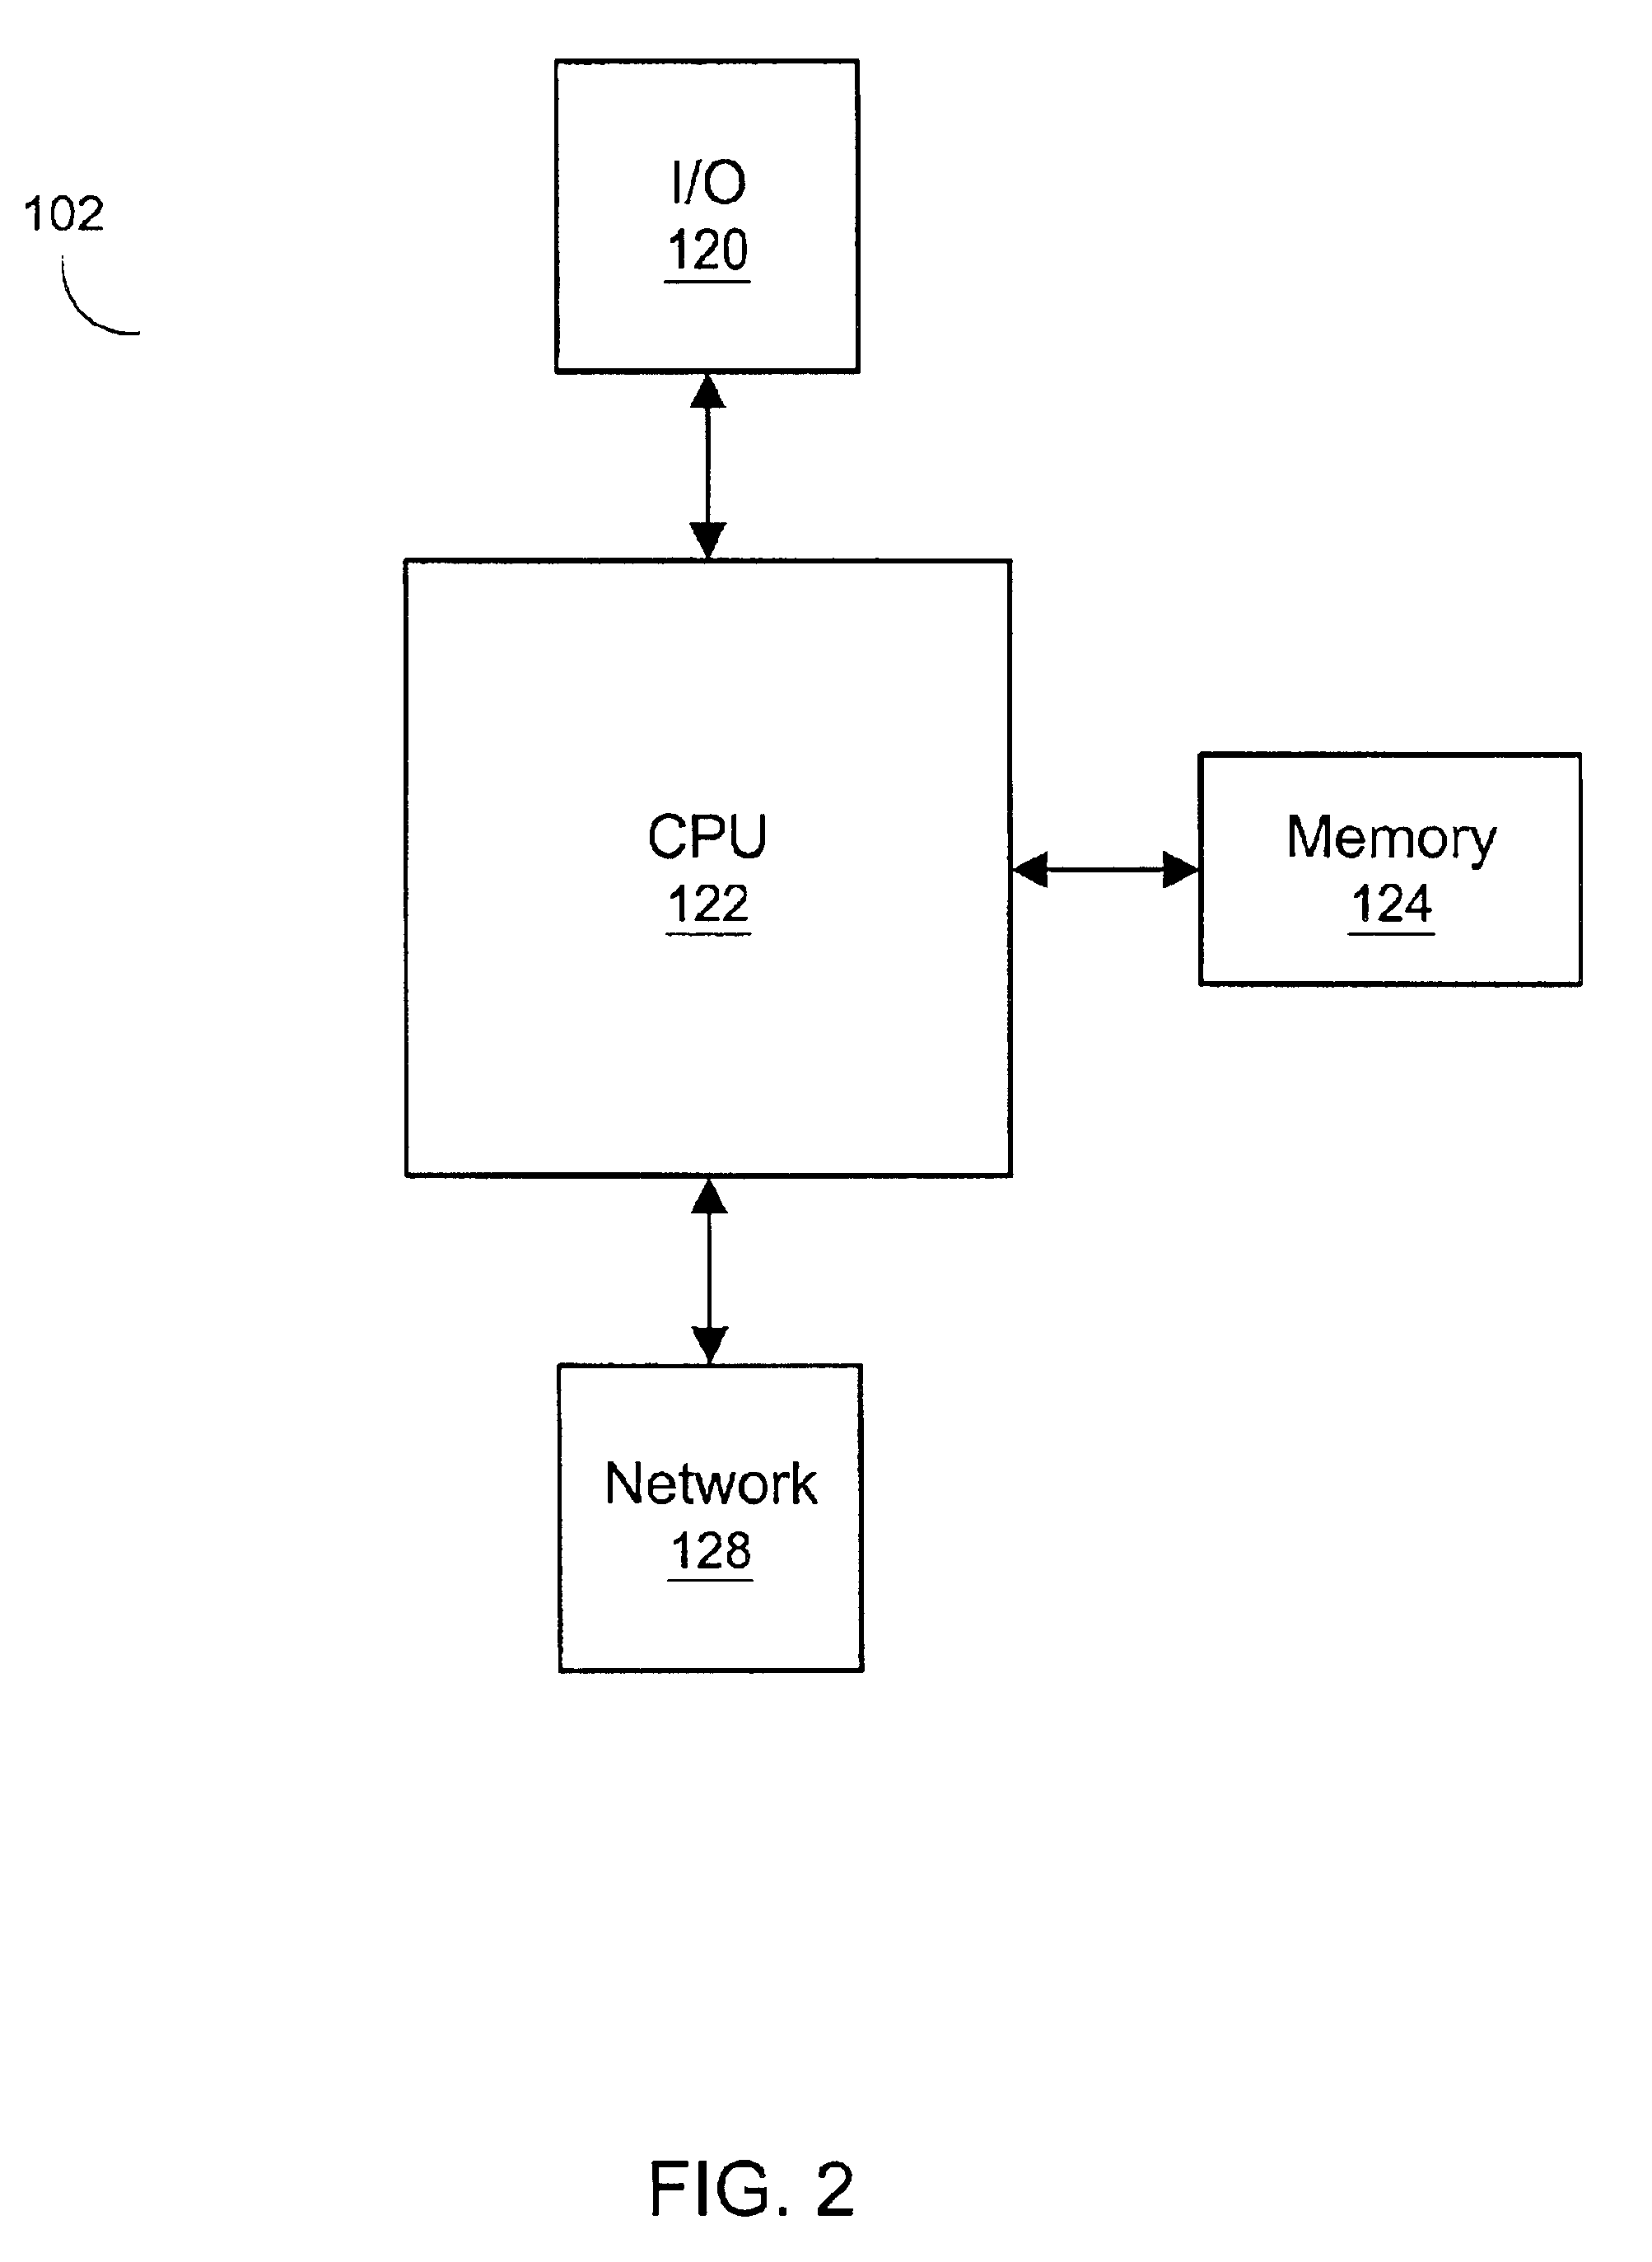 Database management system and method which monitors activity levels and determines appropriate schedule times